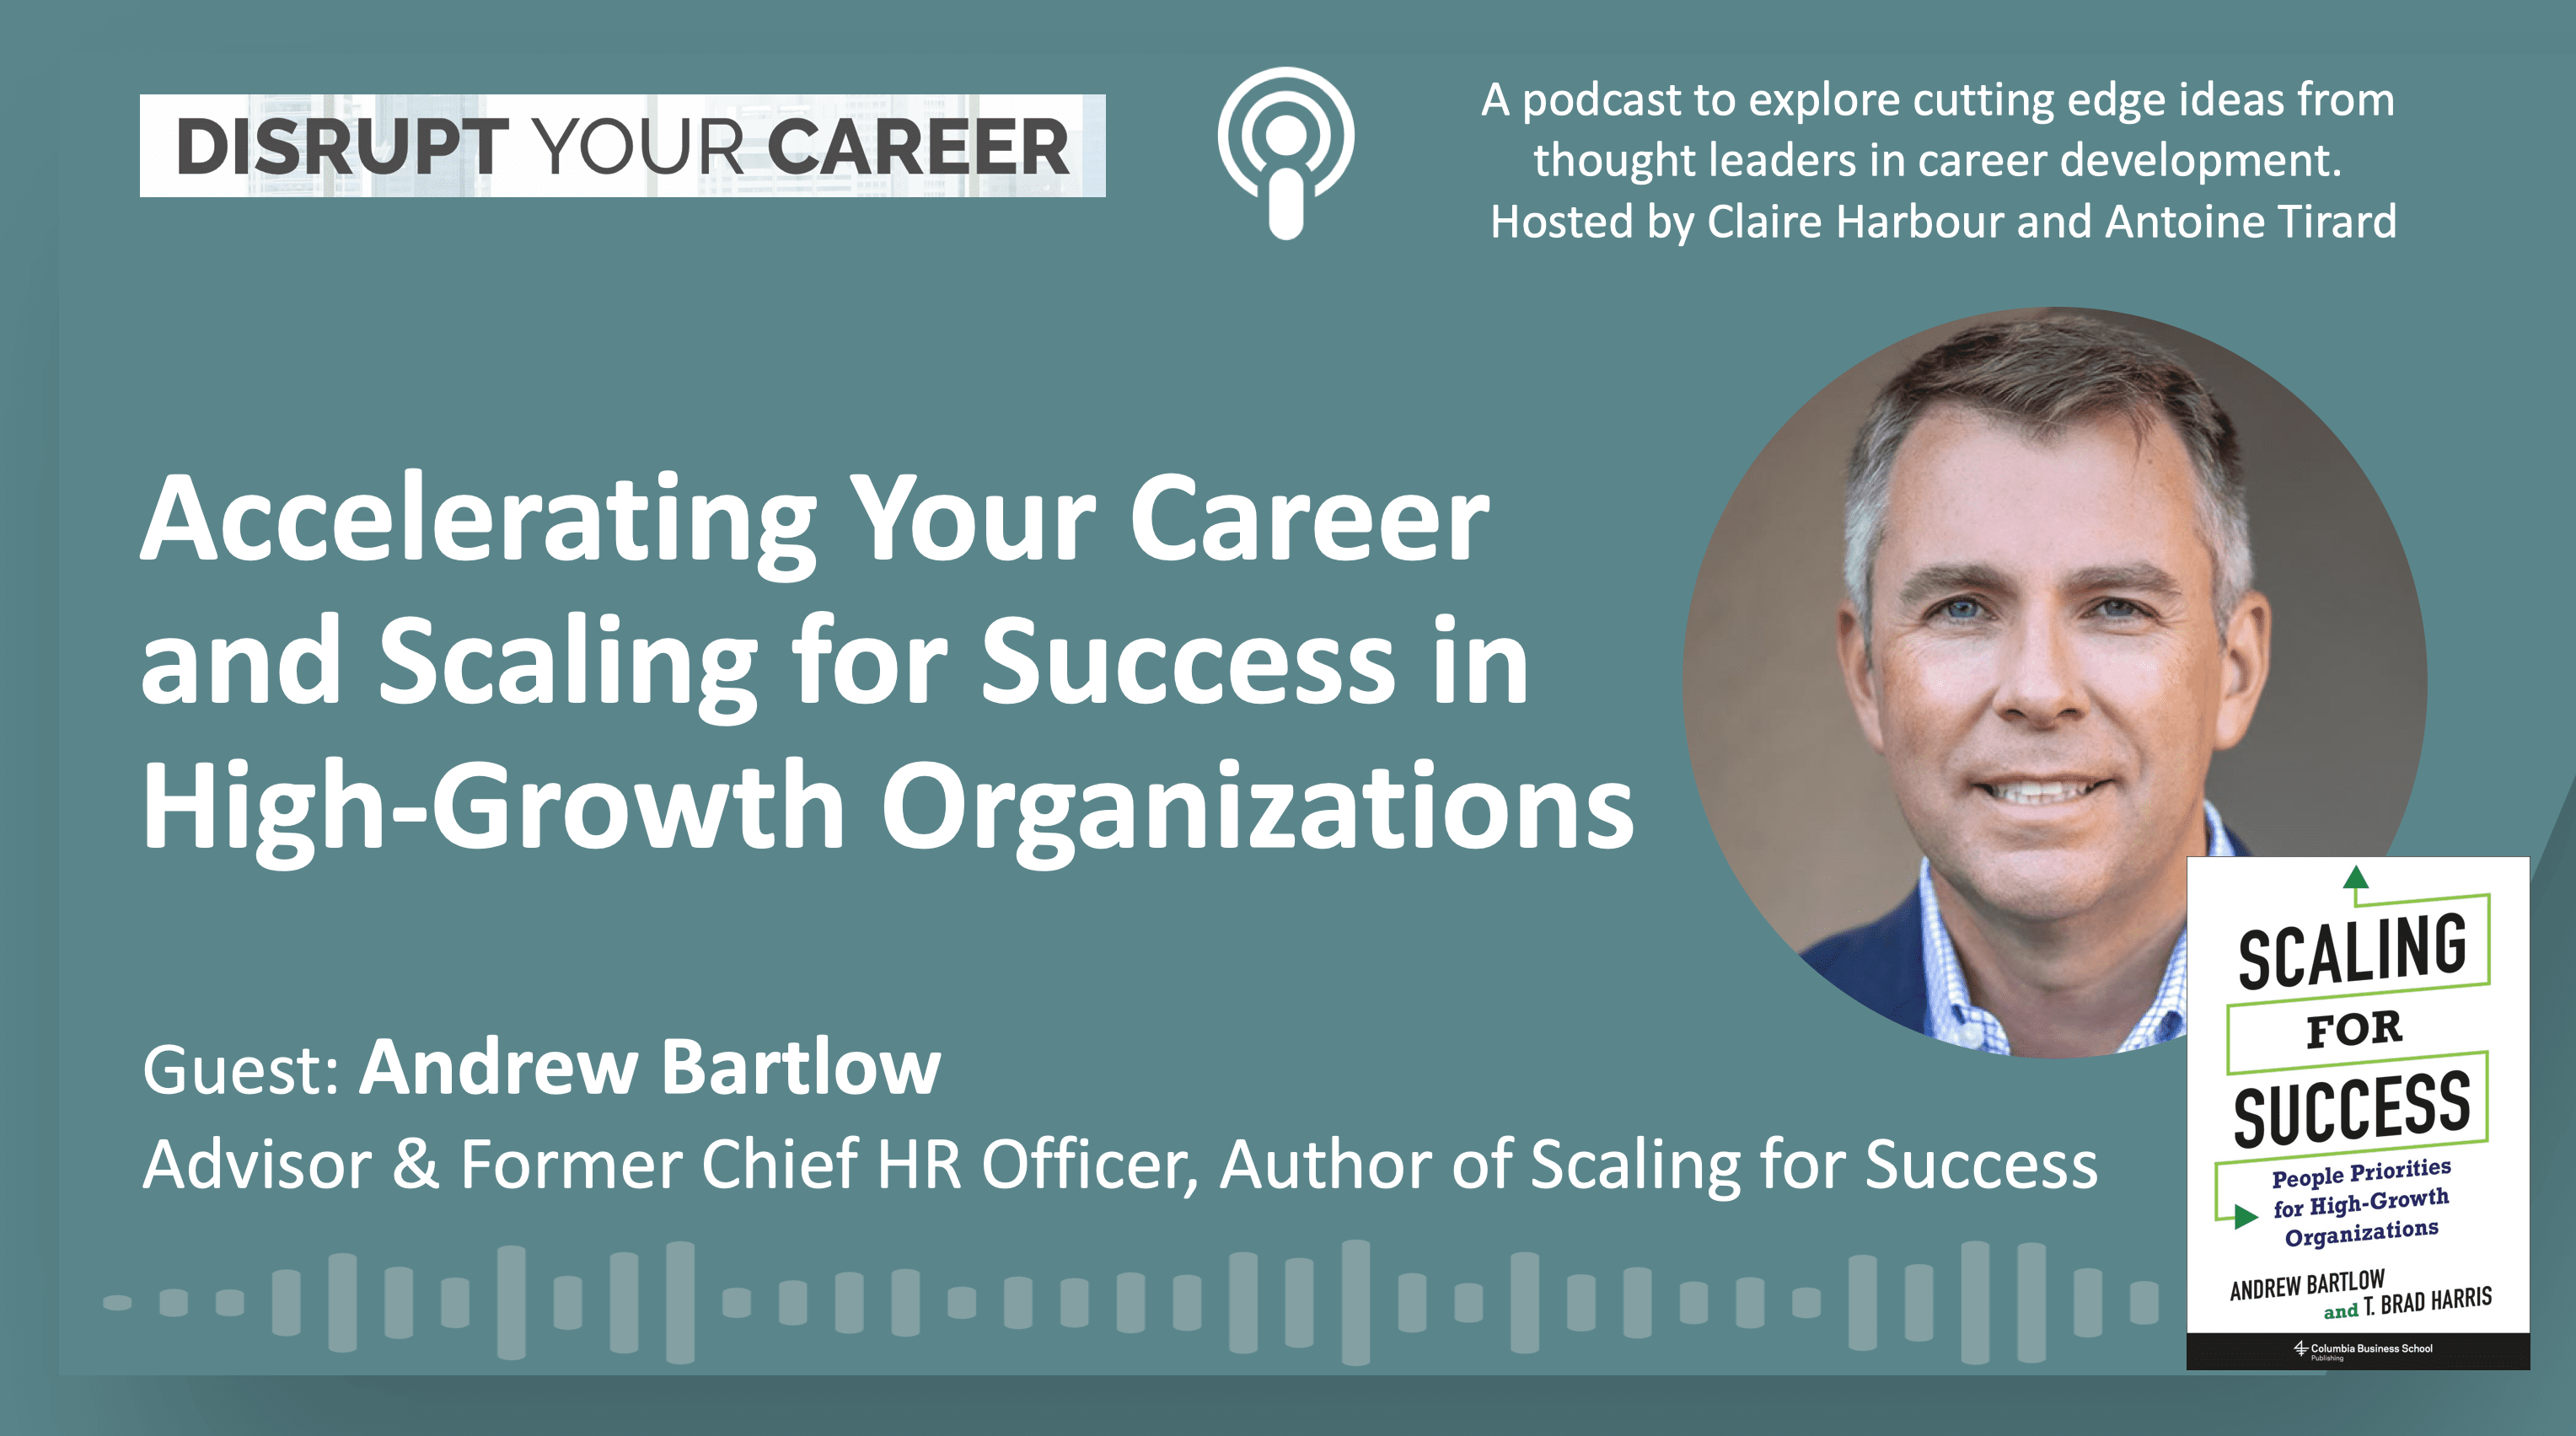 Accelerating Your Career and Scaling for Success in High-Growth Organizations